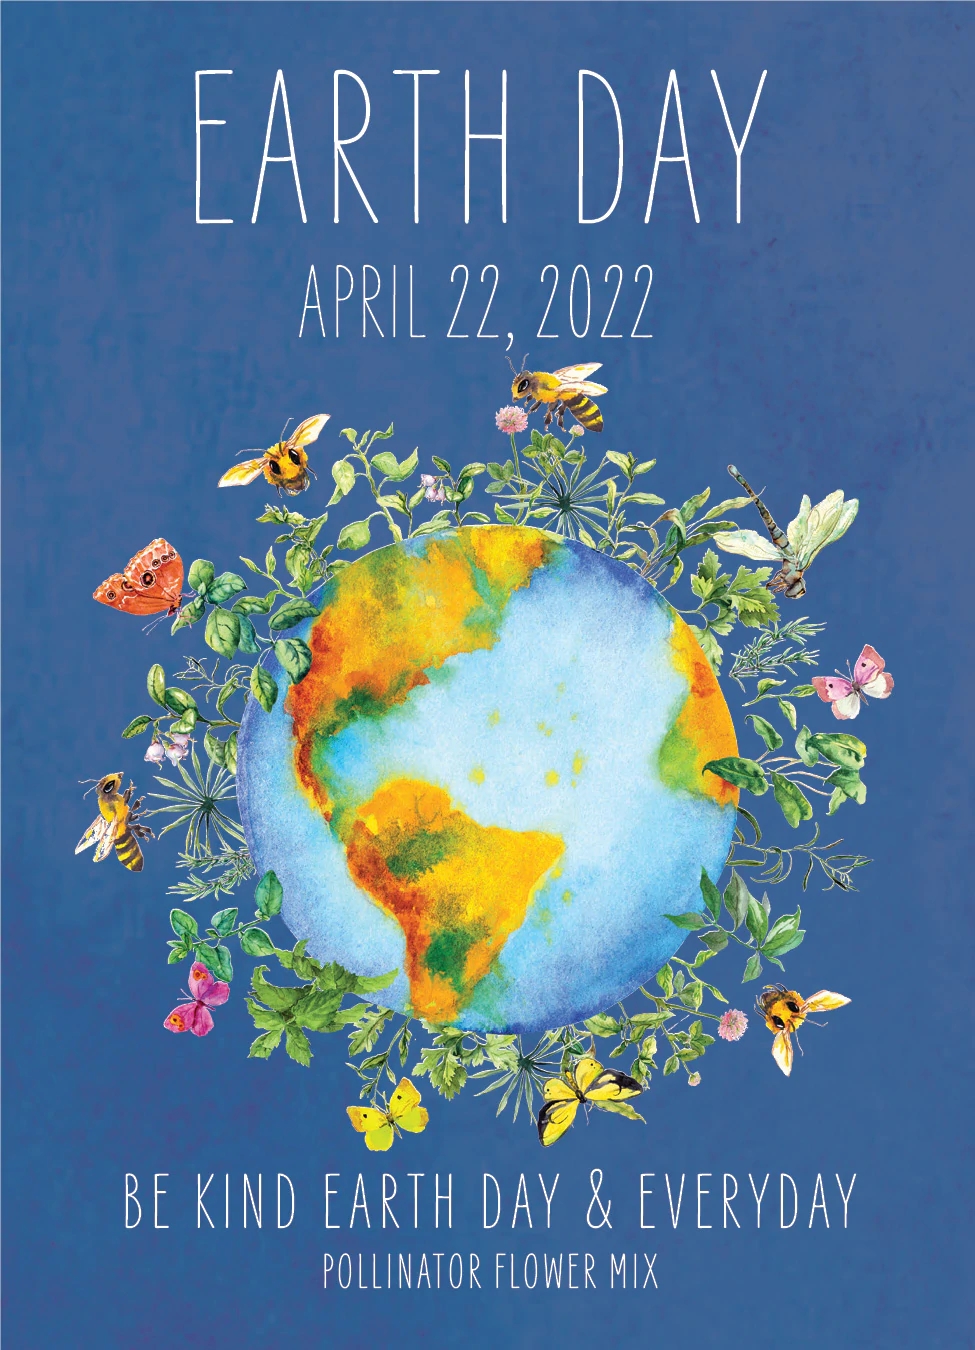 Earth Day Every Day: Re-thinking our Relationship with the Earth